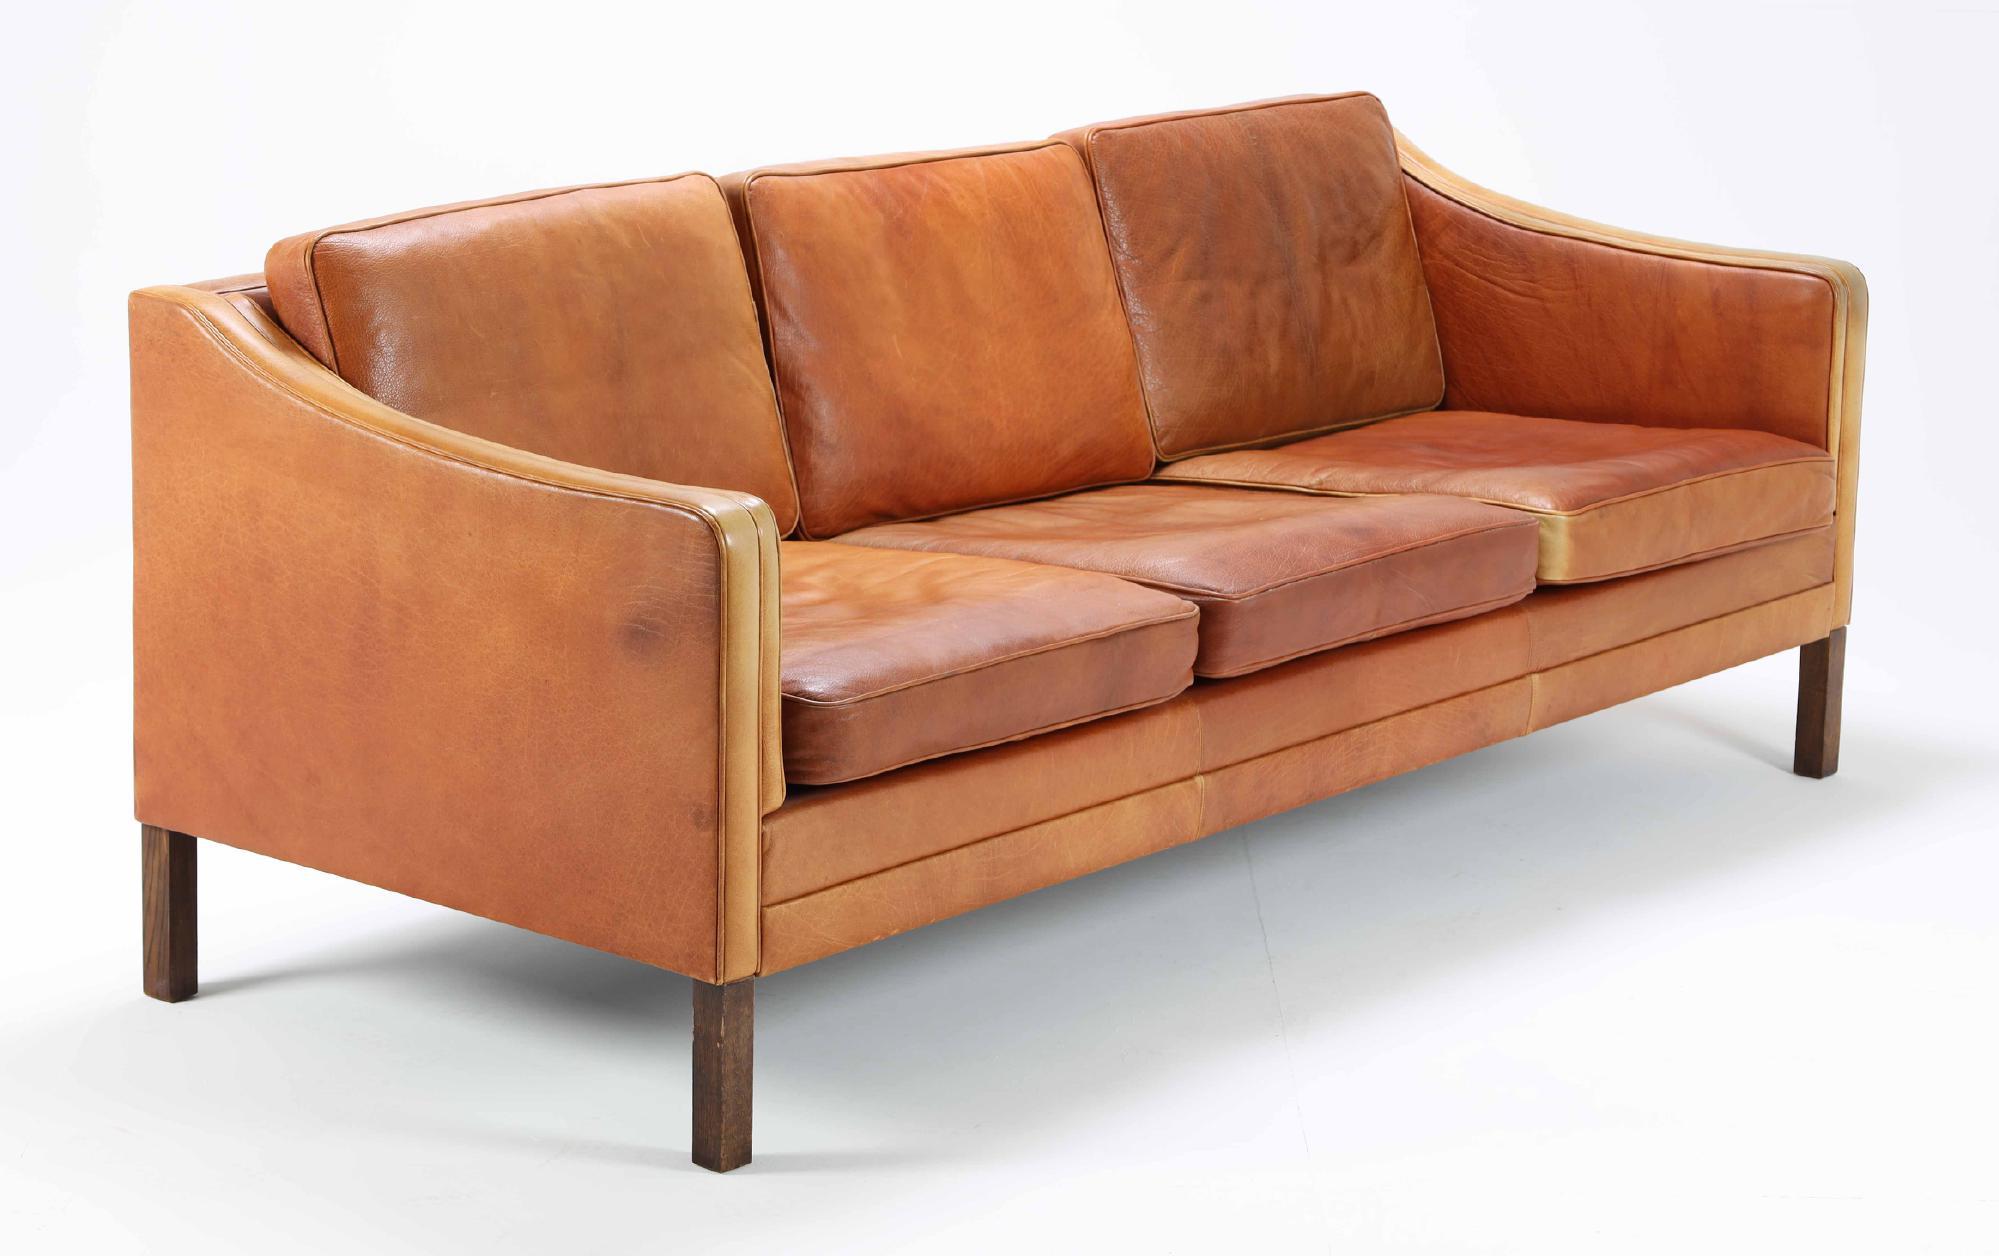 Danish furniture manufacturer: Three-person sofa with cognac-colored aniline leather cover